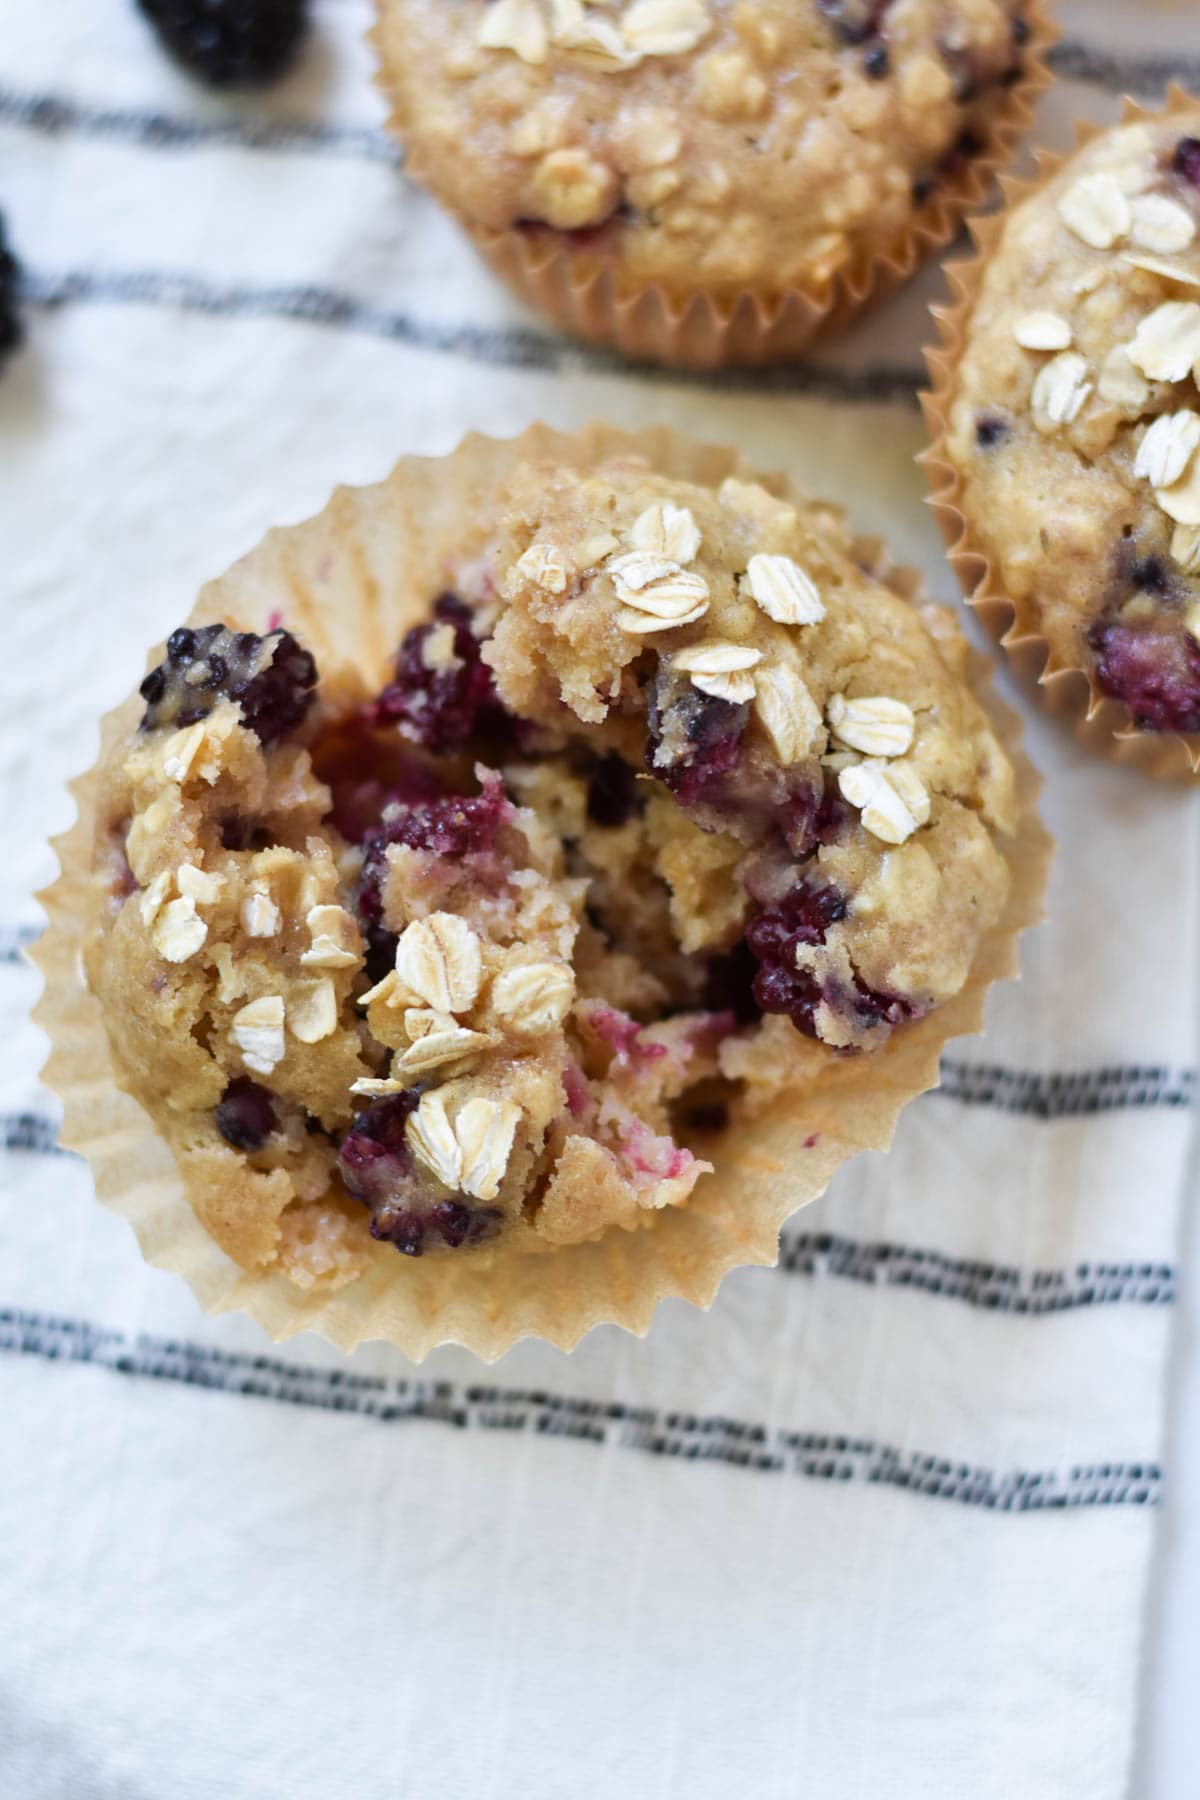 A muffin torn open to show the inside with blackberries.